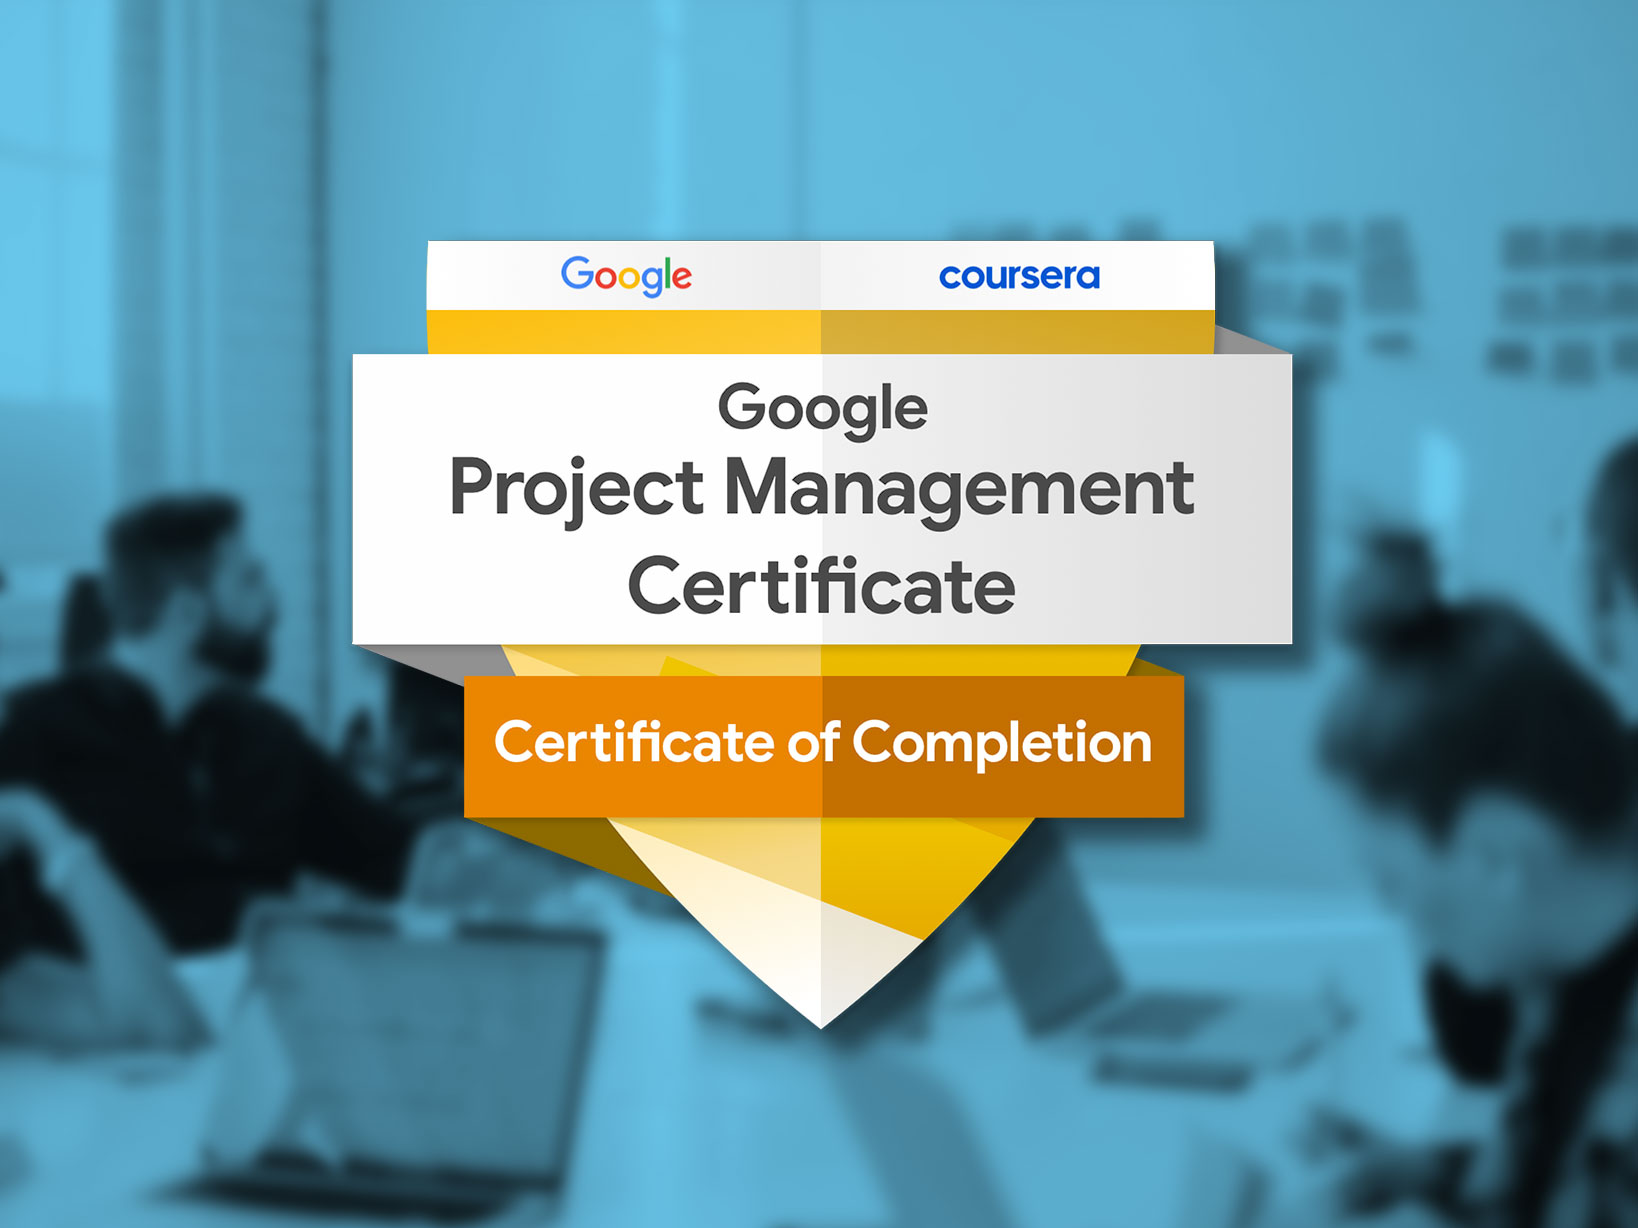 Mastering Milestones: My Journey with Google’s Project Management Certificate